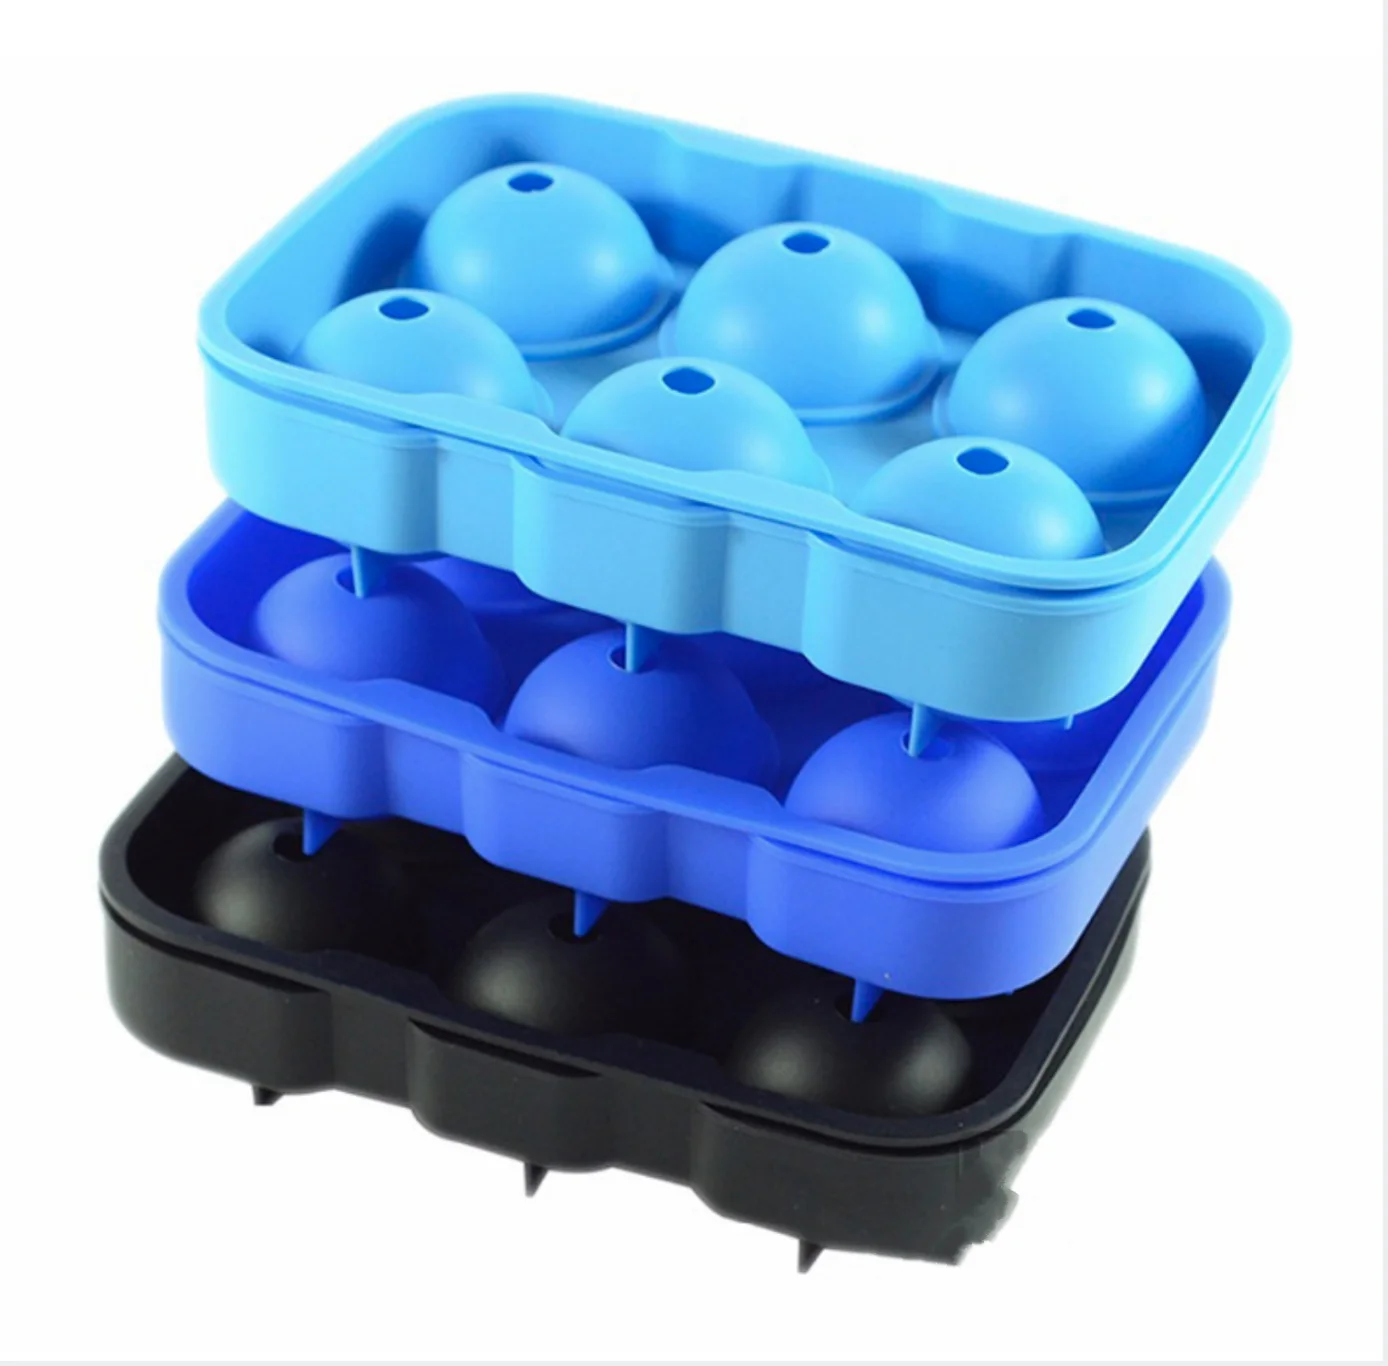 

H934 Home Kitchen Bar Accessory Whiskey Glasses Big Cube Trays 6 Cell Ice Mold Large Round Spheres Reusable Ice Balls Maker, Multi colour